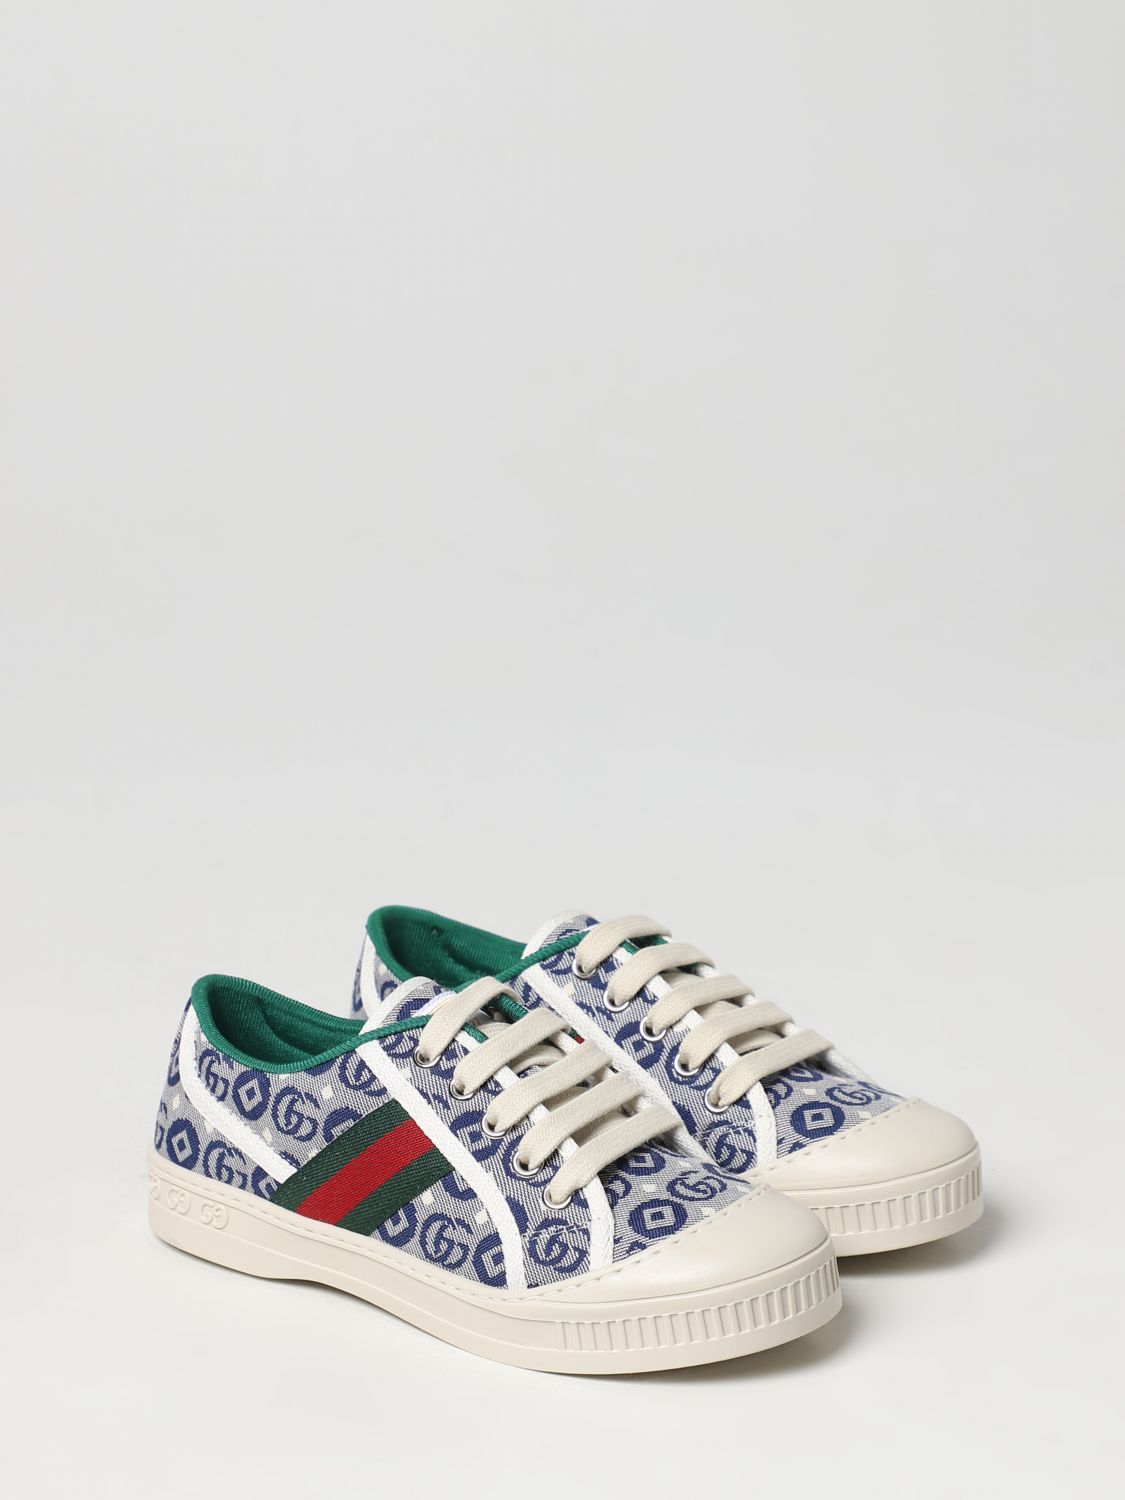 Knop Inspectie huichelarij GUCCI: sneakers in fabric with jacquard GG monogram - Blue | Gucci shoes  682230U4G50 online on GIGLIO.COM